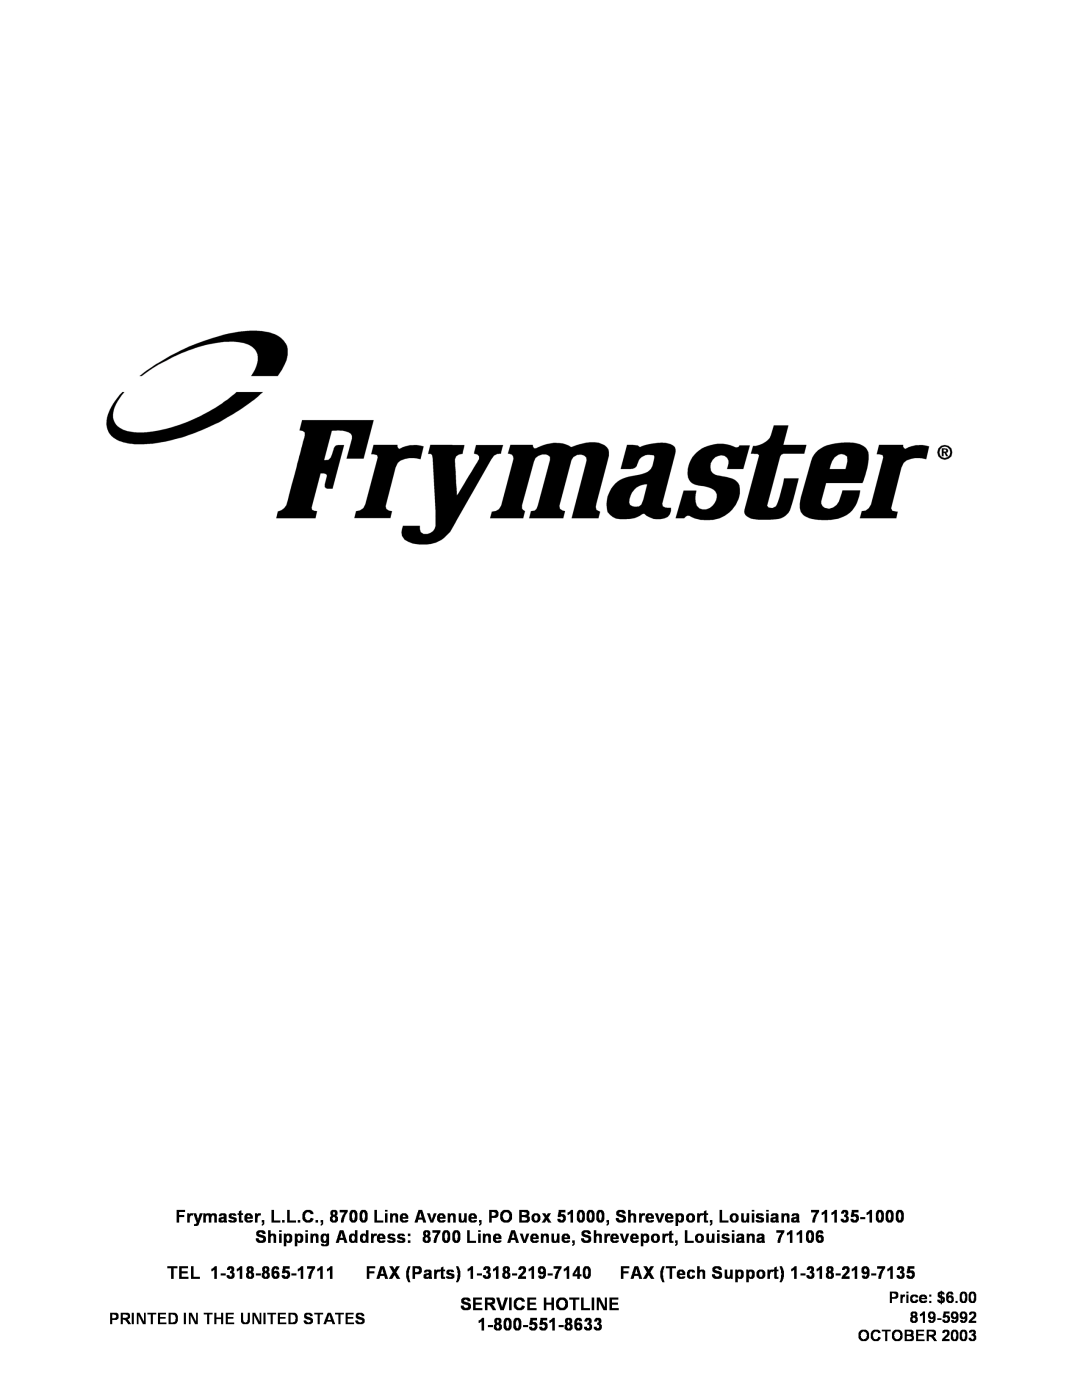 Frymaster CT16 operation manual FAX Parts 1-318-219-7140FAX Tech Support, Service Hotline, Price $6.00, 819-5992, October 